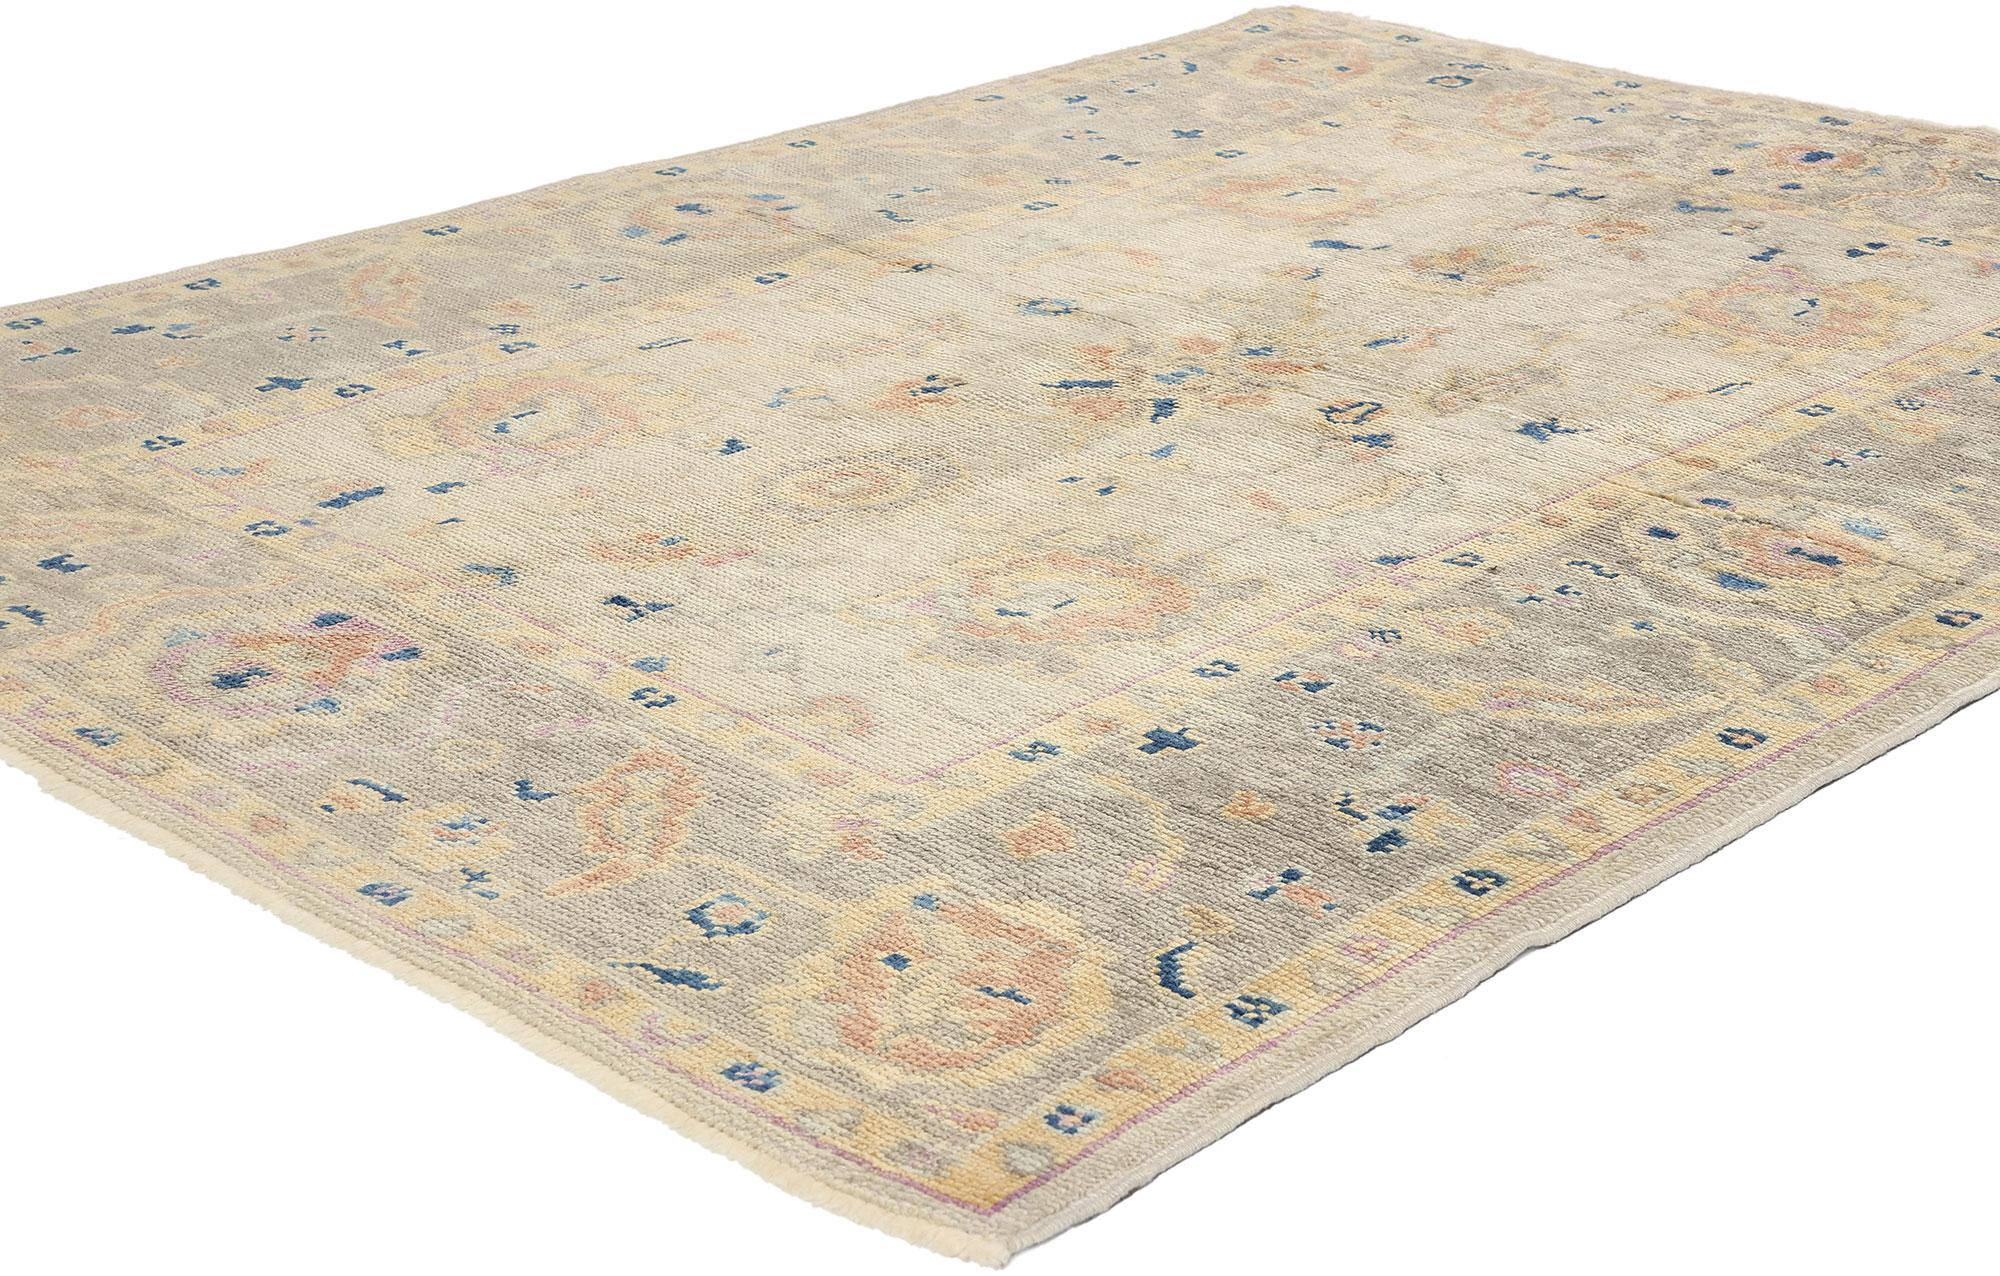 53605 New Modern Pastel Earth-Tone Turkish Oushak Rug, 04'10 x 06'08. In the weave of this contemporary Turkish Oushak rug, modern design merges with a palette of tranquil pastel earth tones, creating a serene yet impressive canvas. Hand-knotted